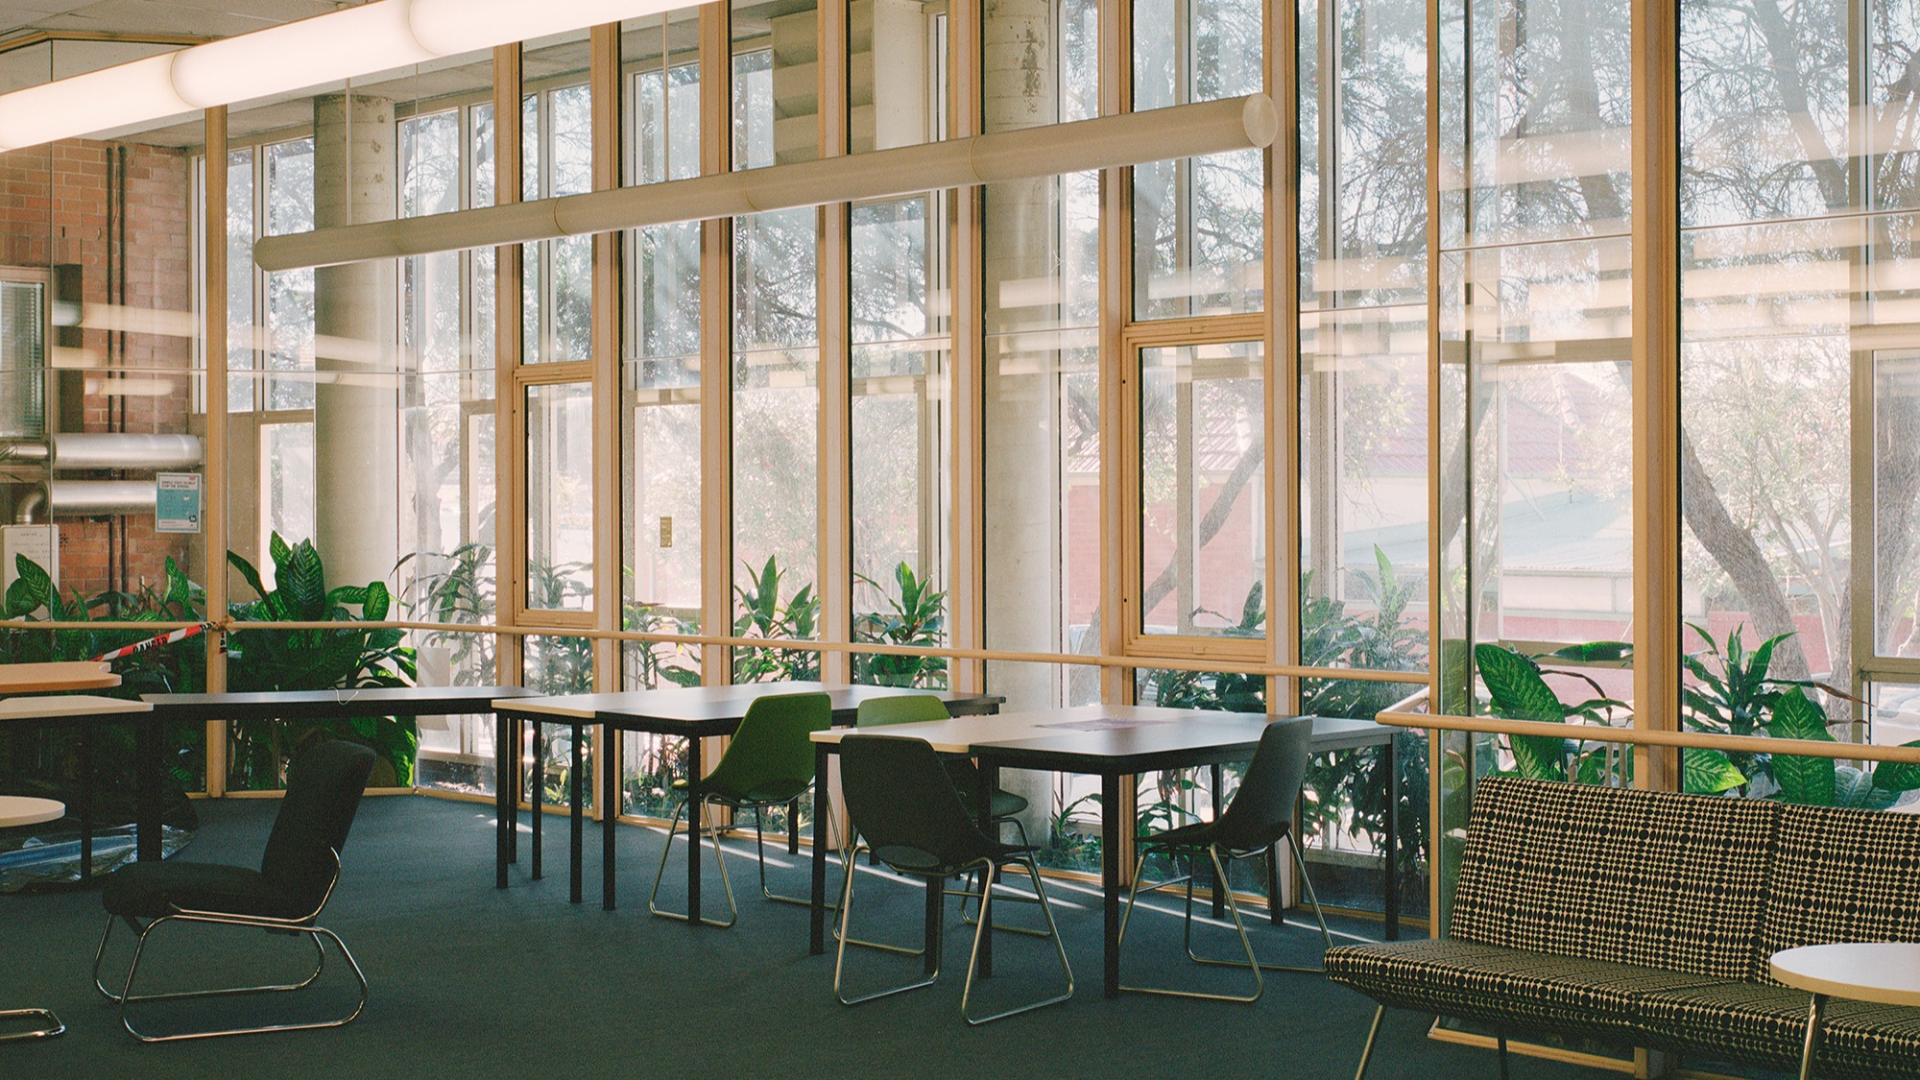 Interior shot of Petersham College of Technical and Further Education (TAFE), from 'Regional Bureaucracy'